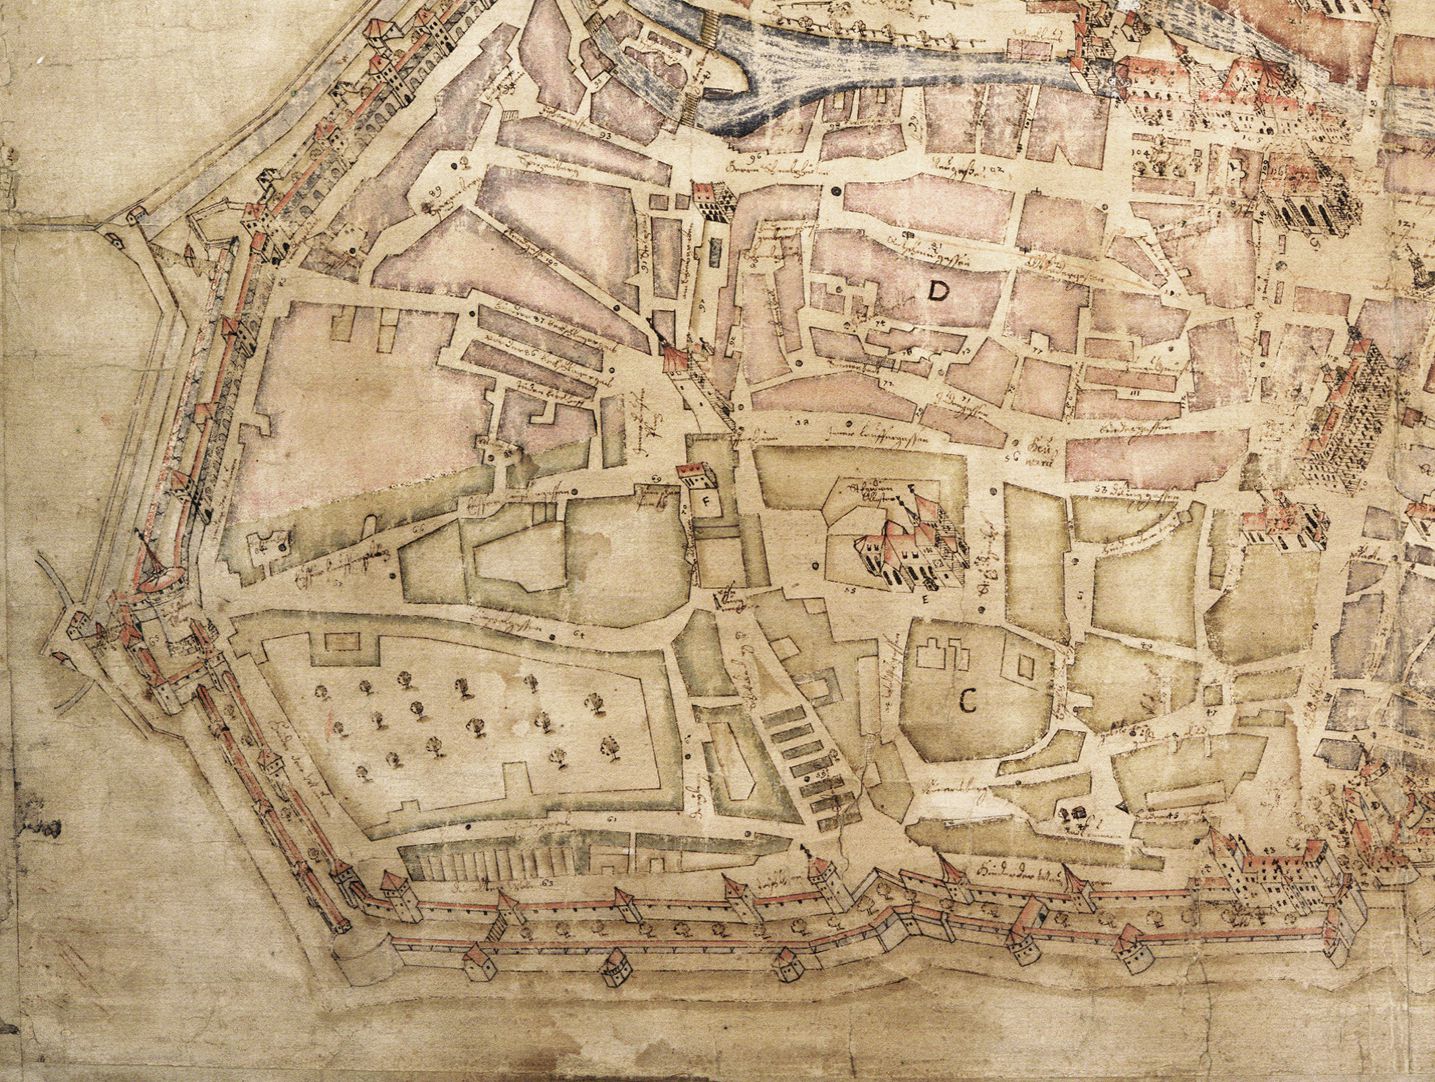 This City of Nuremberg within its enclosing walls… Left lower quarter of the map